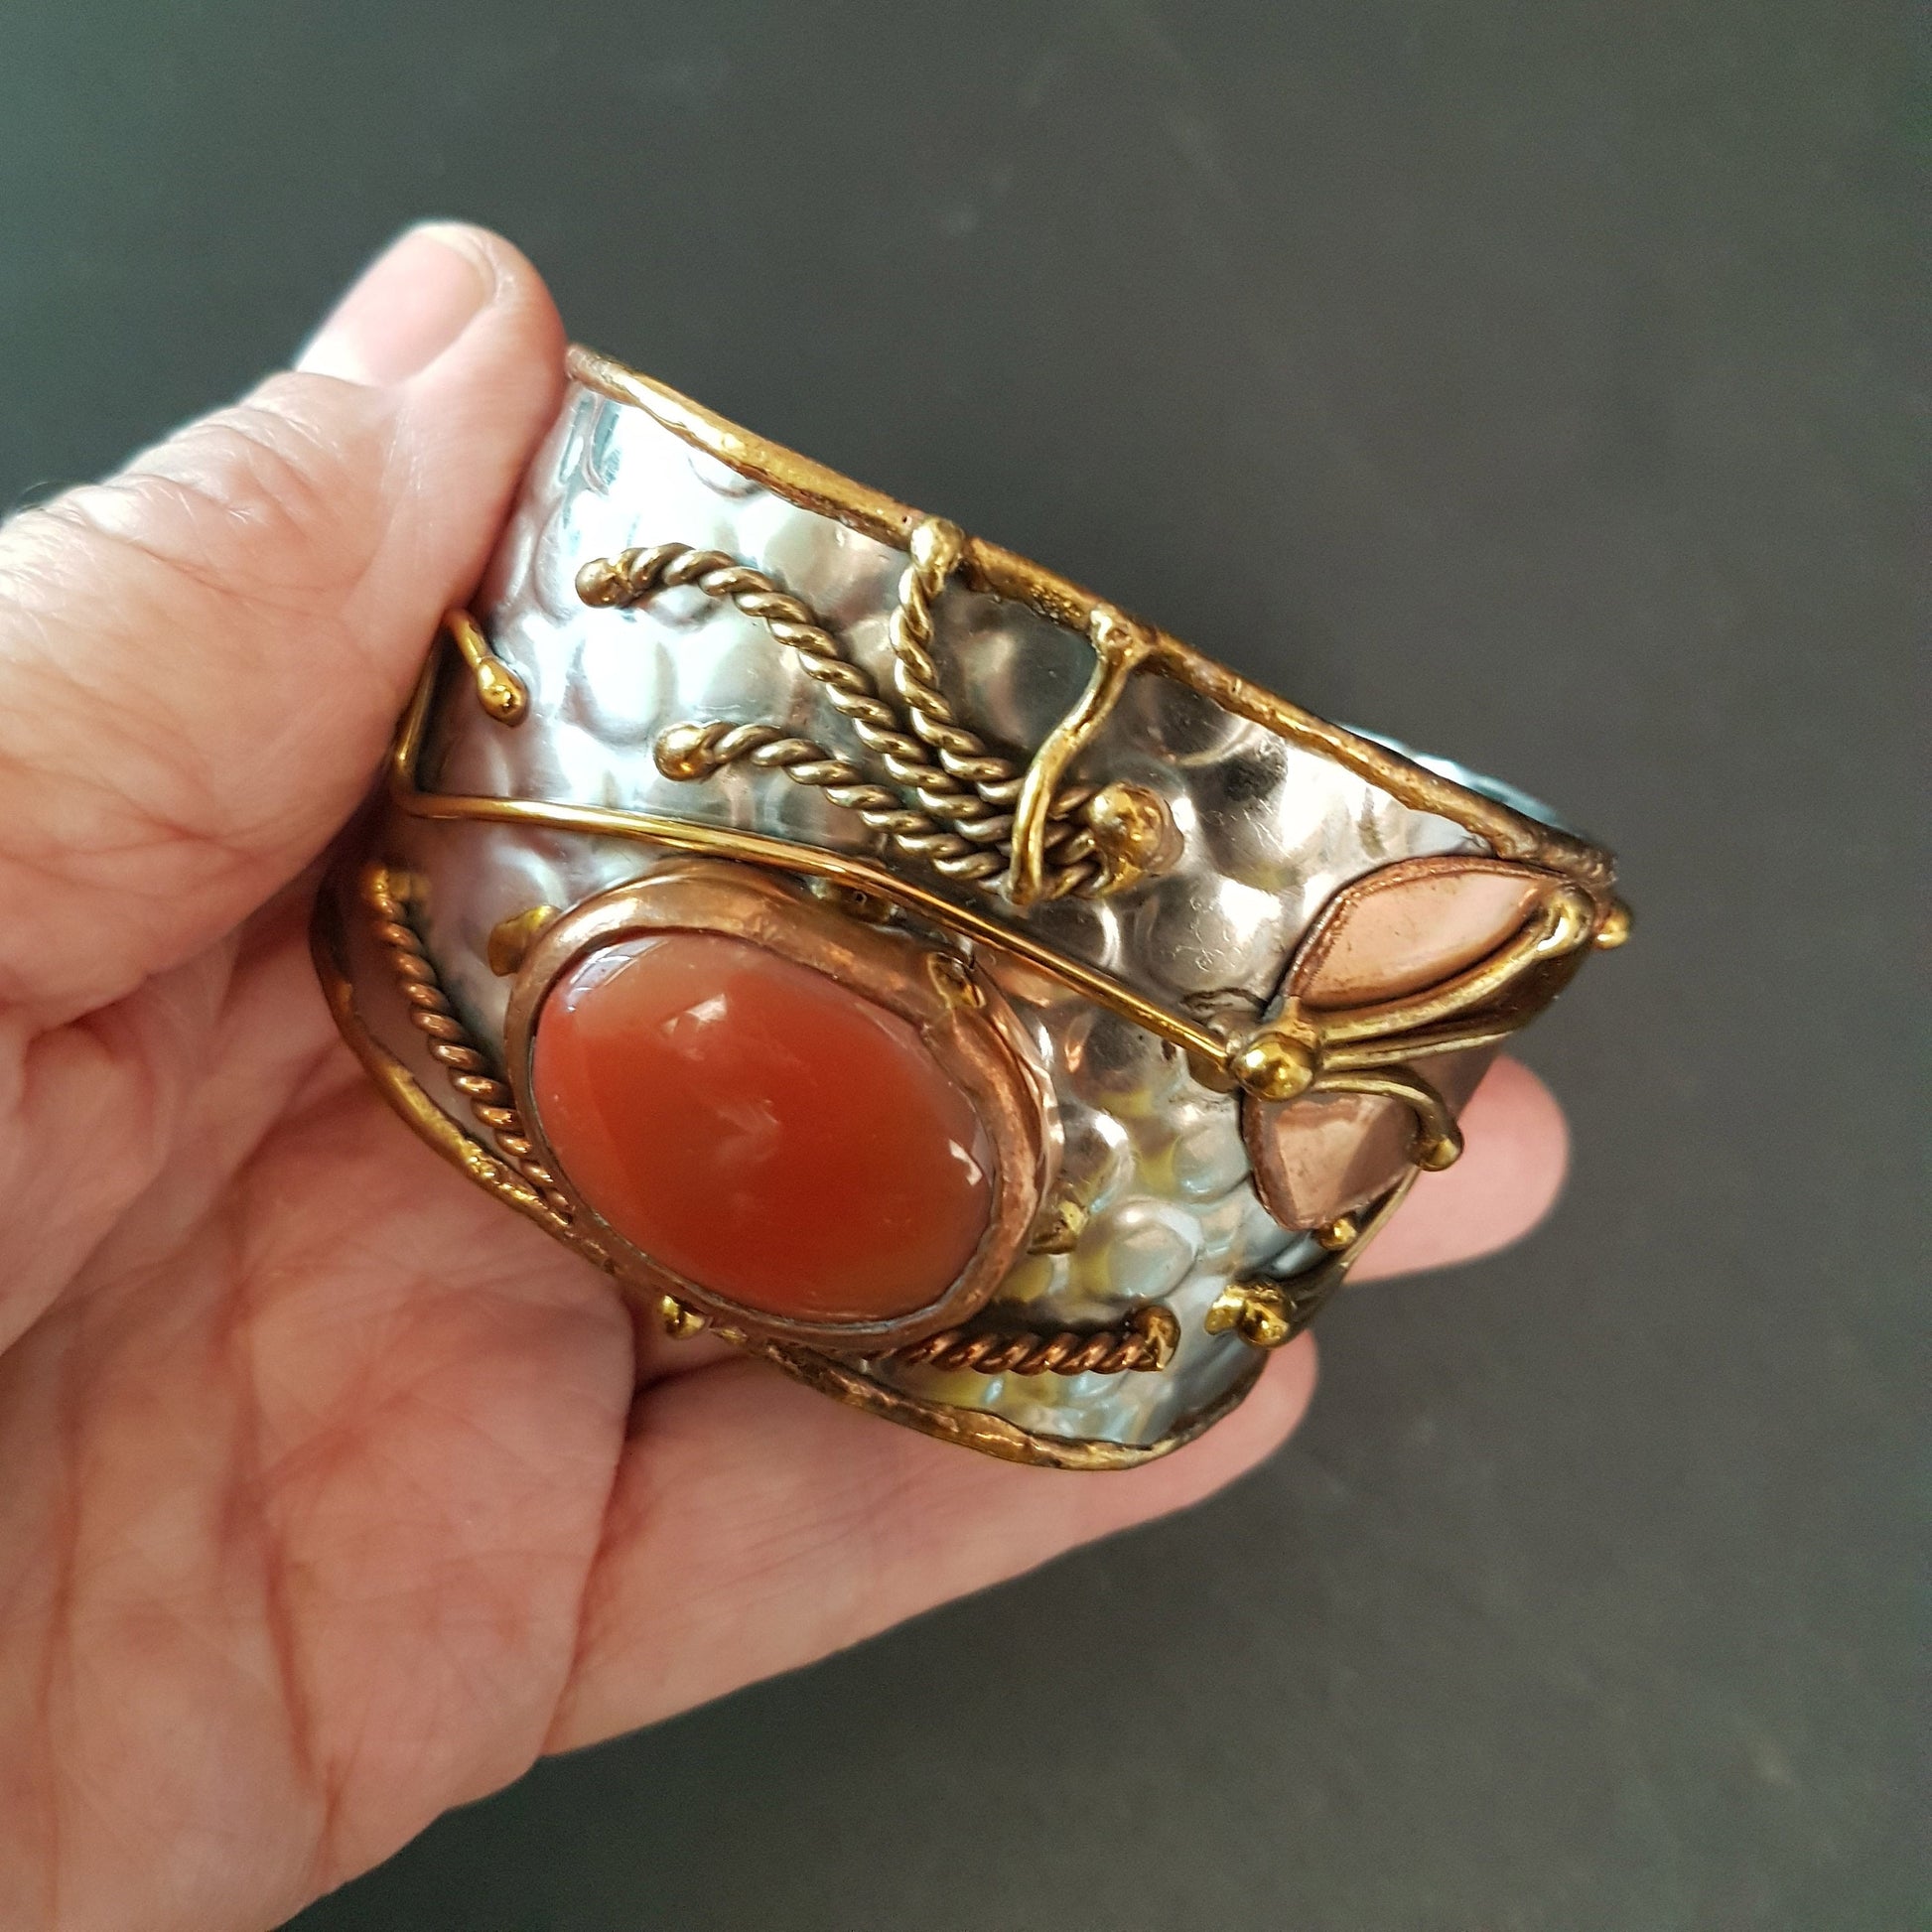 Vintage silver cuff bracelet with a large oval carnelian stone. Celtic trimetal medieval handwrought design. Copper & brass on silver metal. - Vintage India Ca